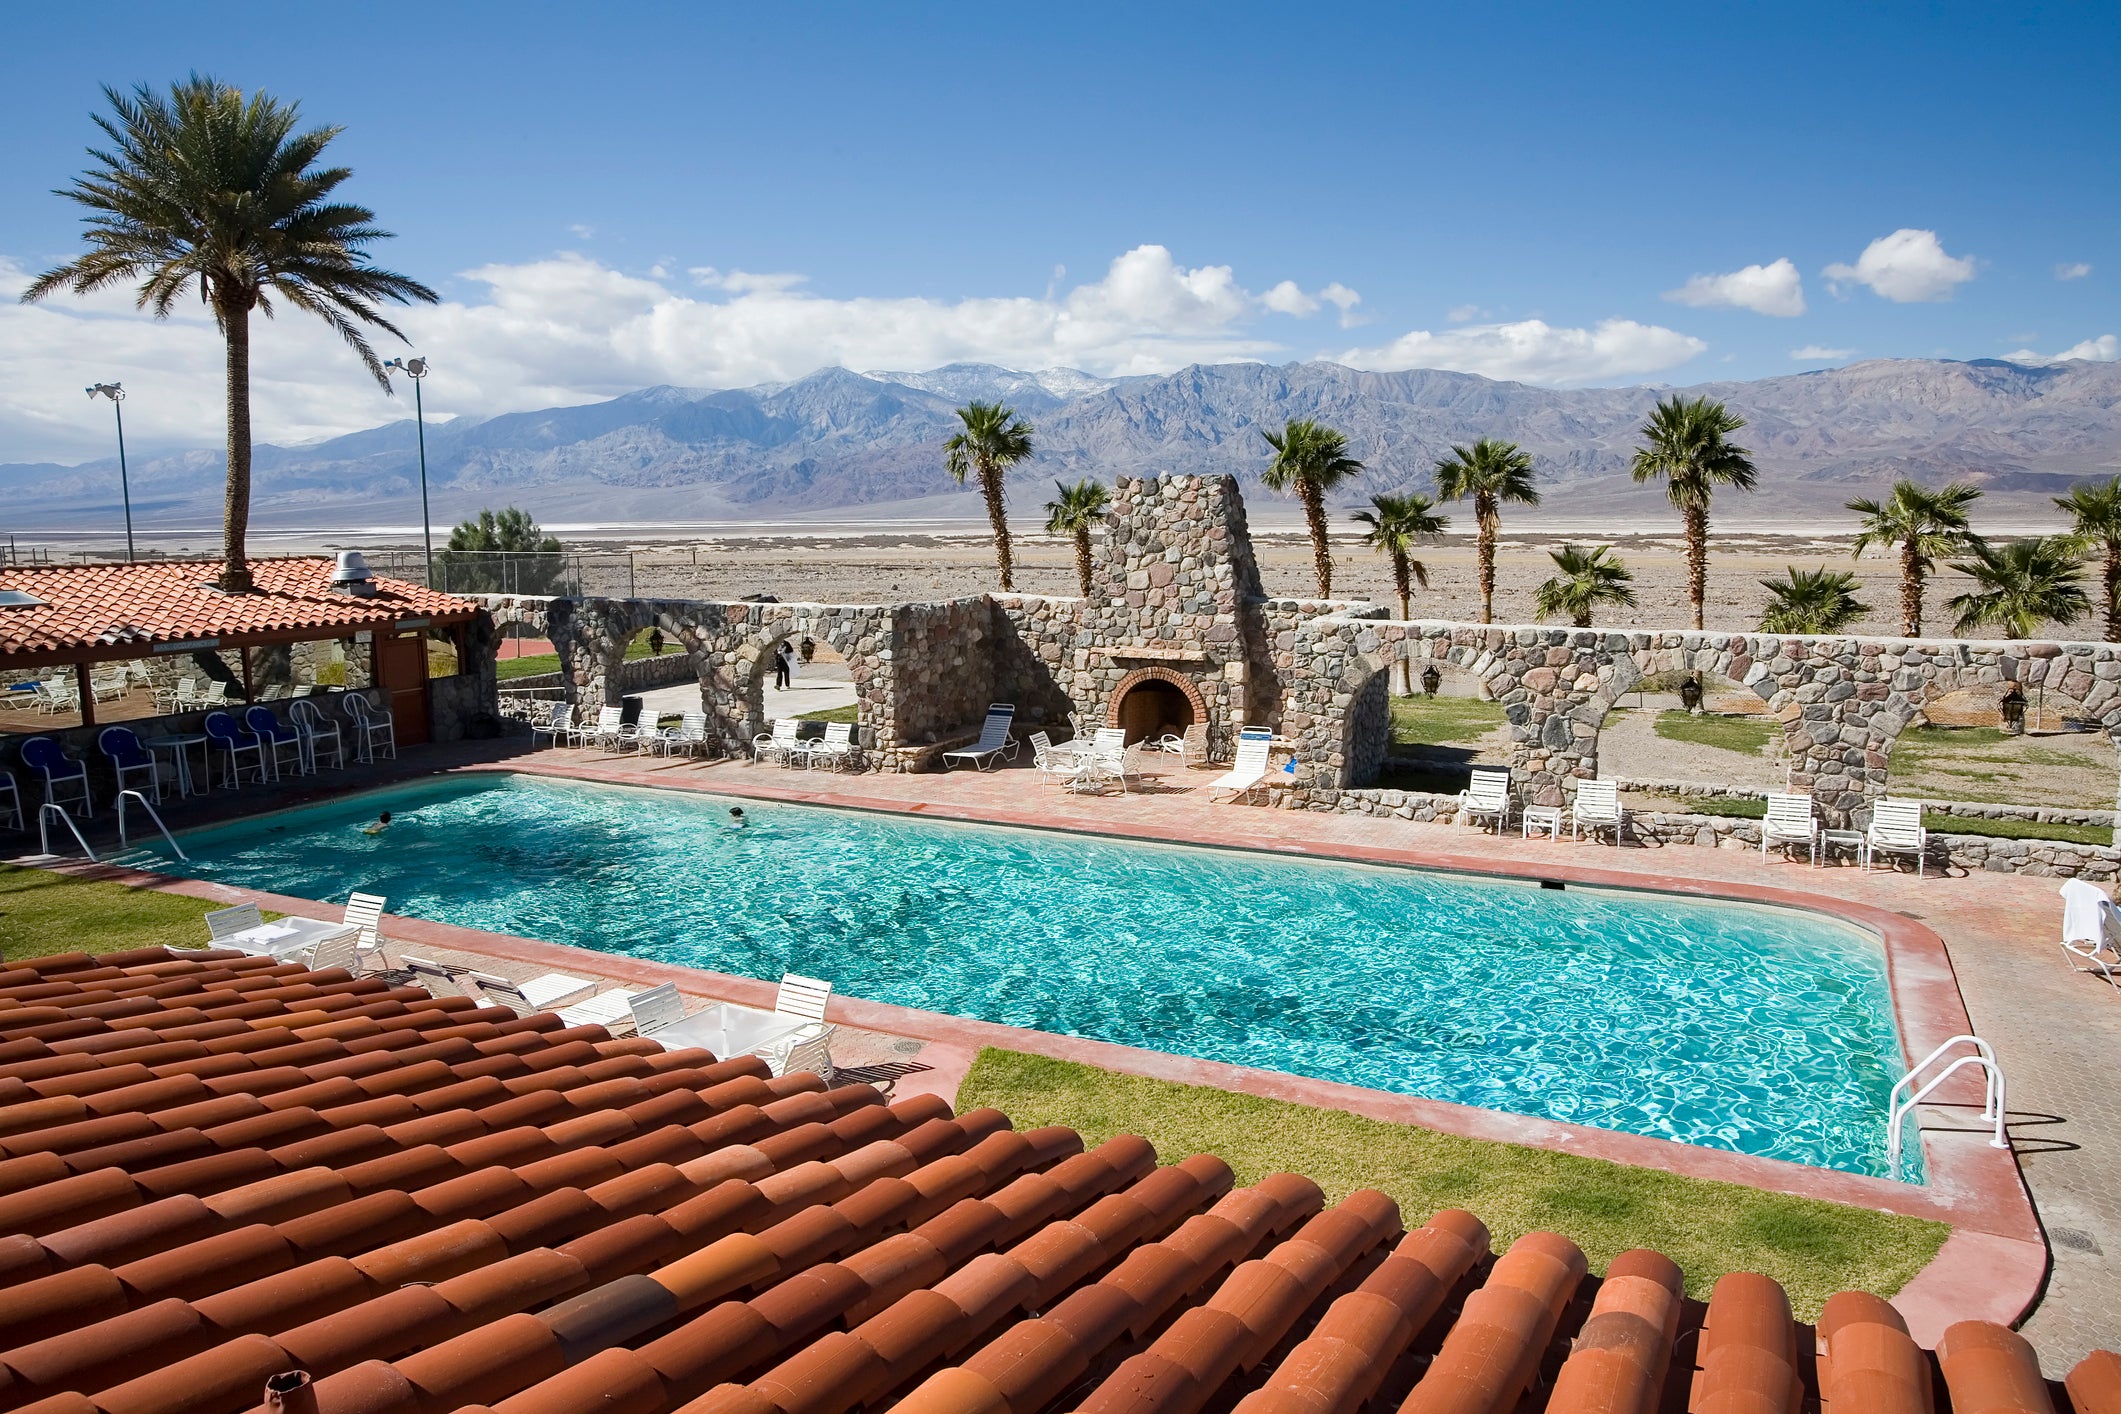 Furnace Creek in the California desert recorded a sweltering 56.7C air temperature